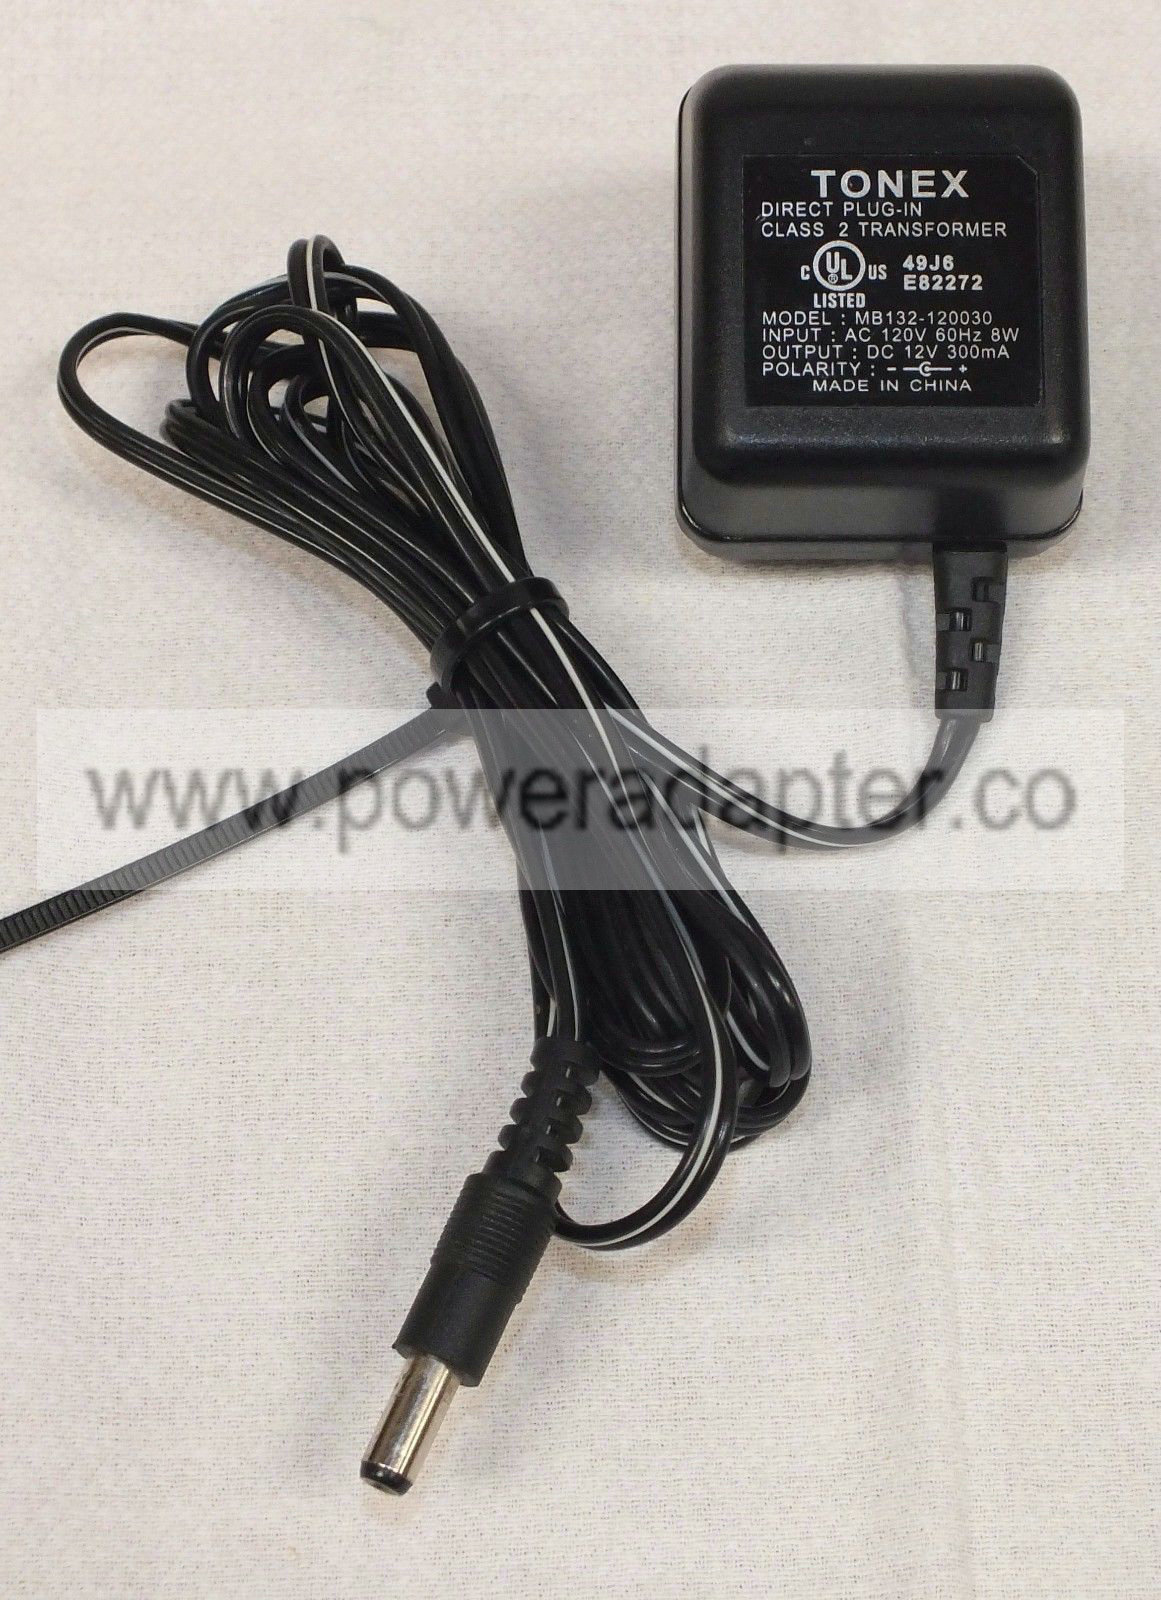 MB132-120030 Tonex 12V 300mA Direct Plug-In wallcharger 60Hz 8W AC Power Supply charger